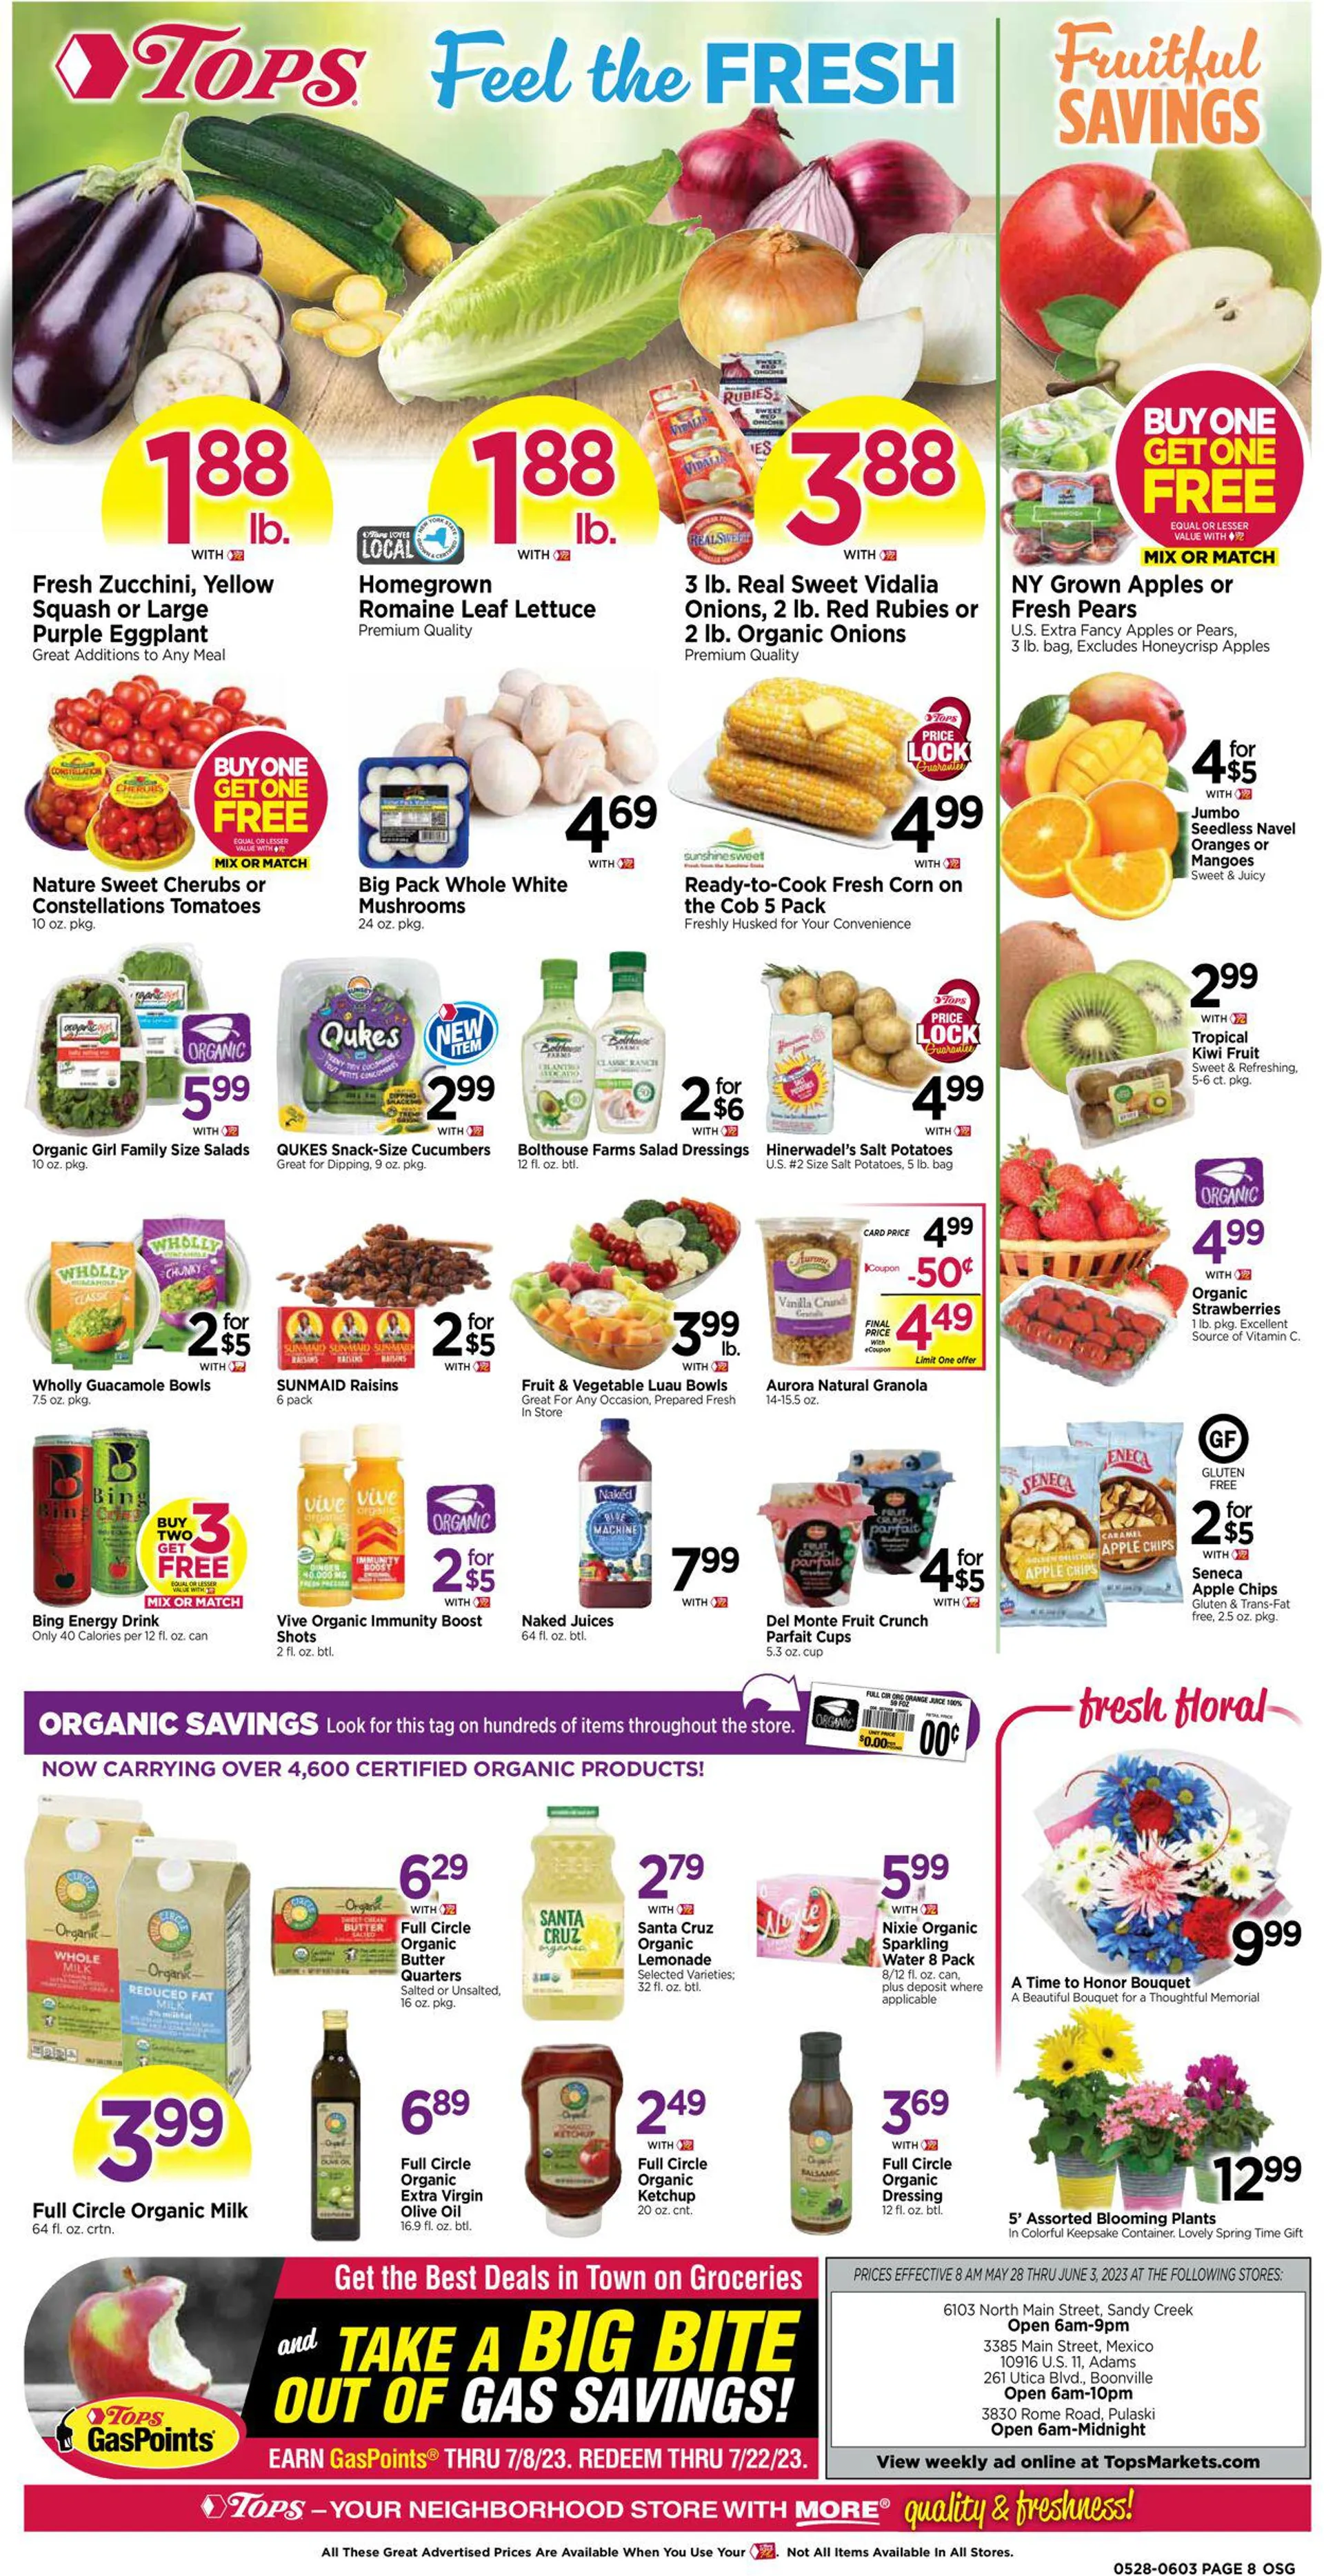 Tops Friendly Markets Current weekly ad - 8